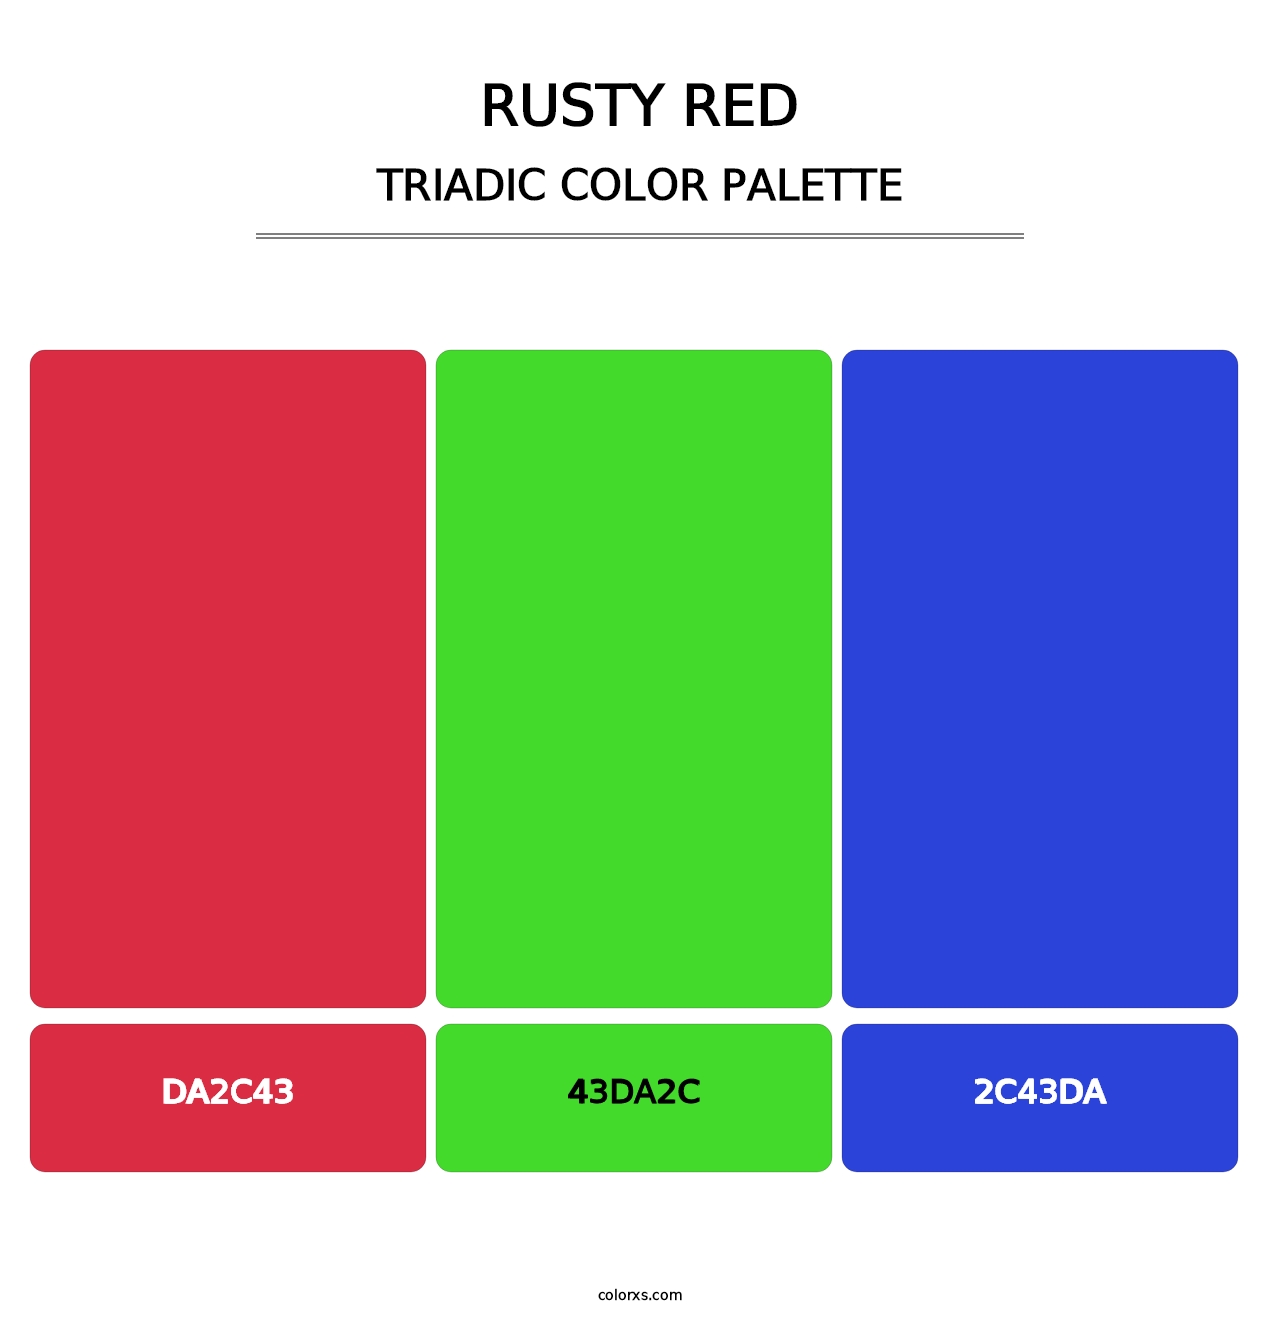 Rusty Red - Triadic Color Palette